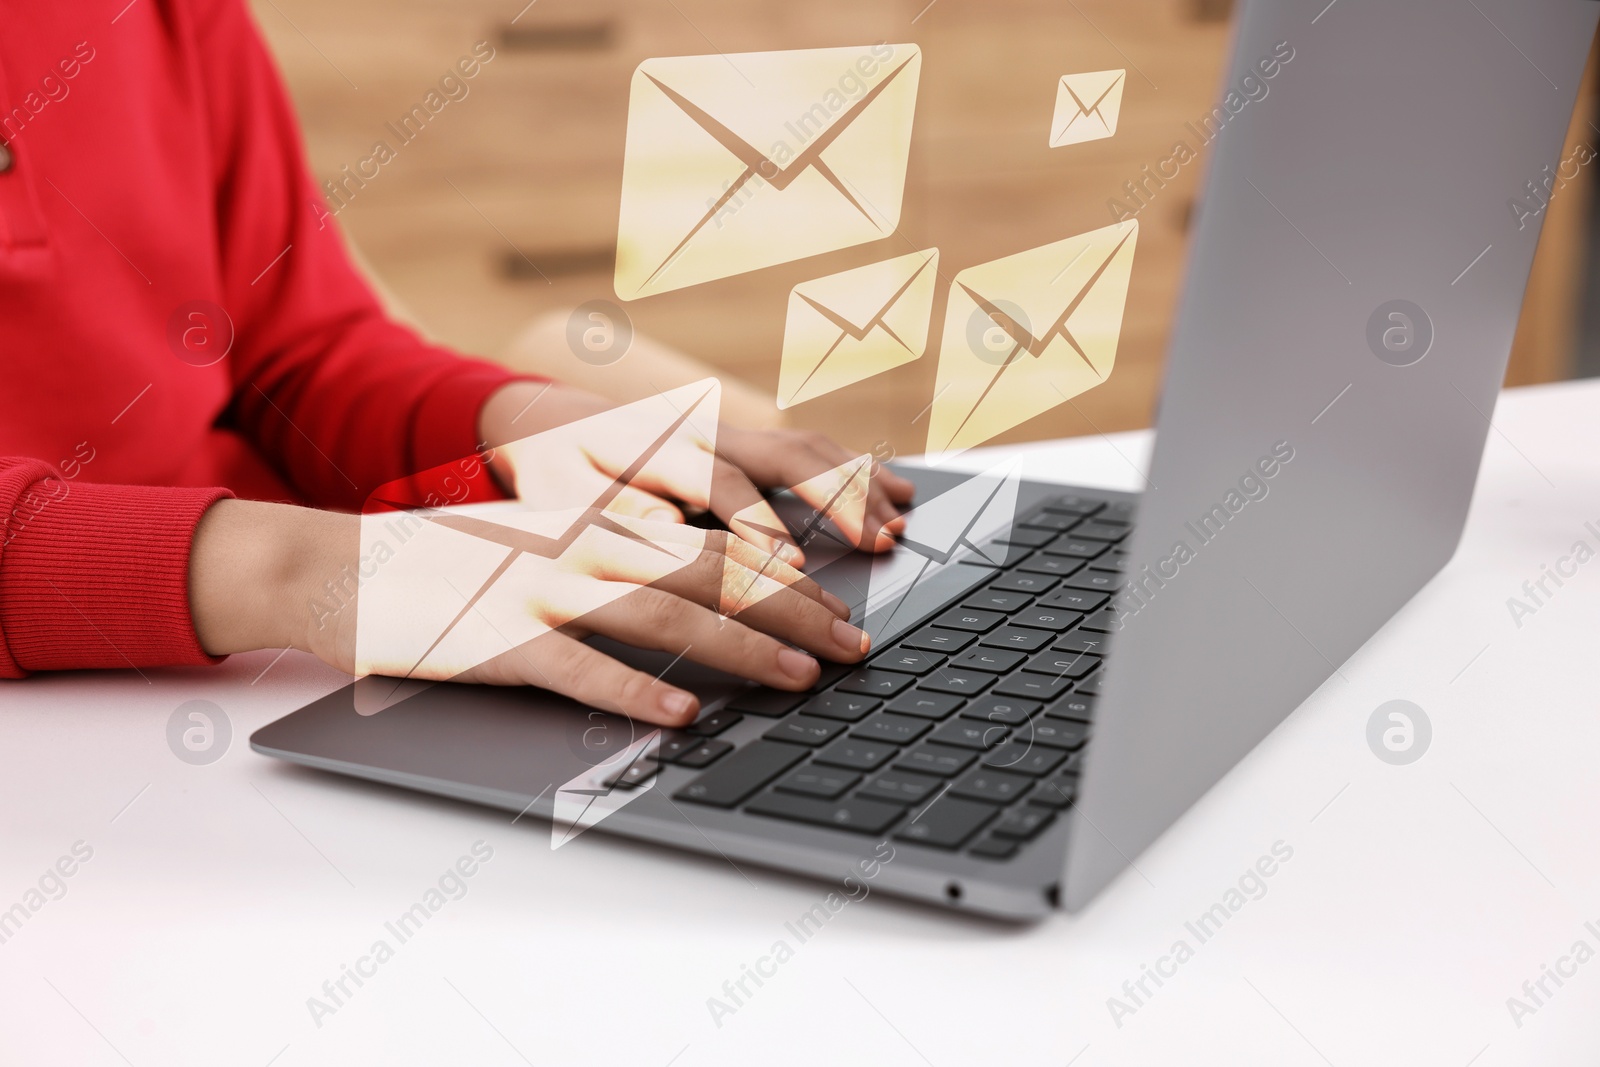 Image of Woman typing on laptop at table indoors, closeup. Many illustrations of envelope as incoming messages over device